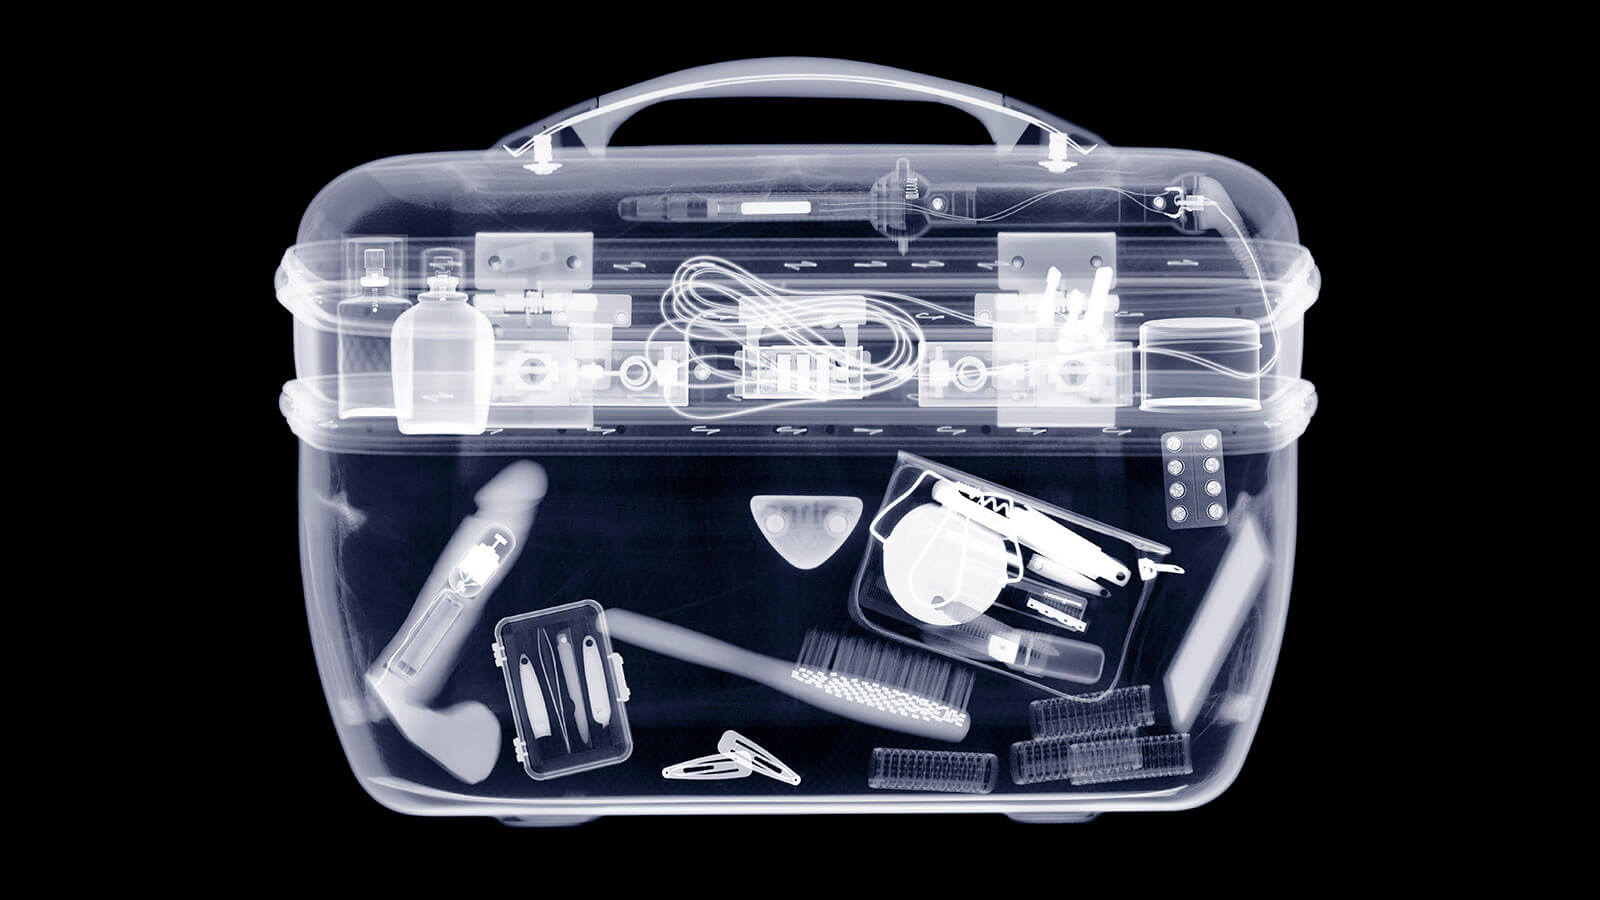 X-ray image of vanity case containing a sex toy